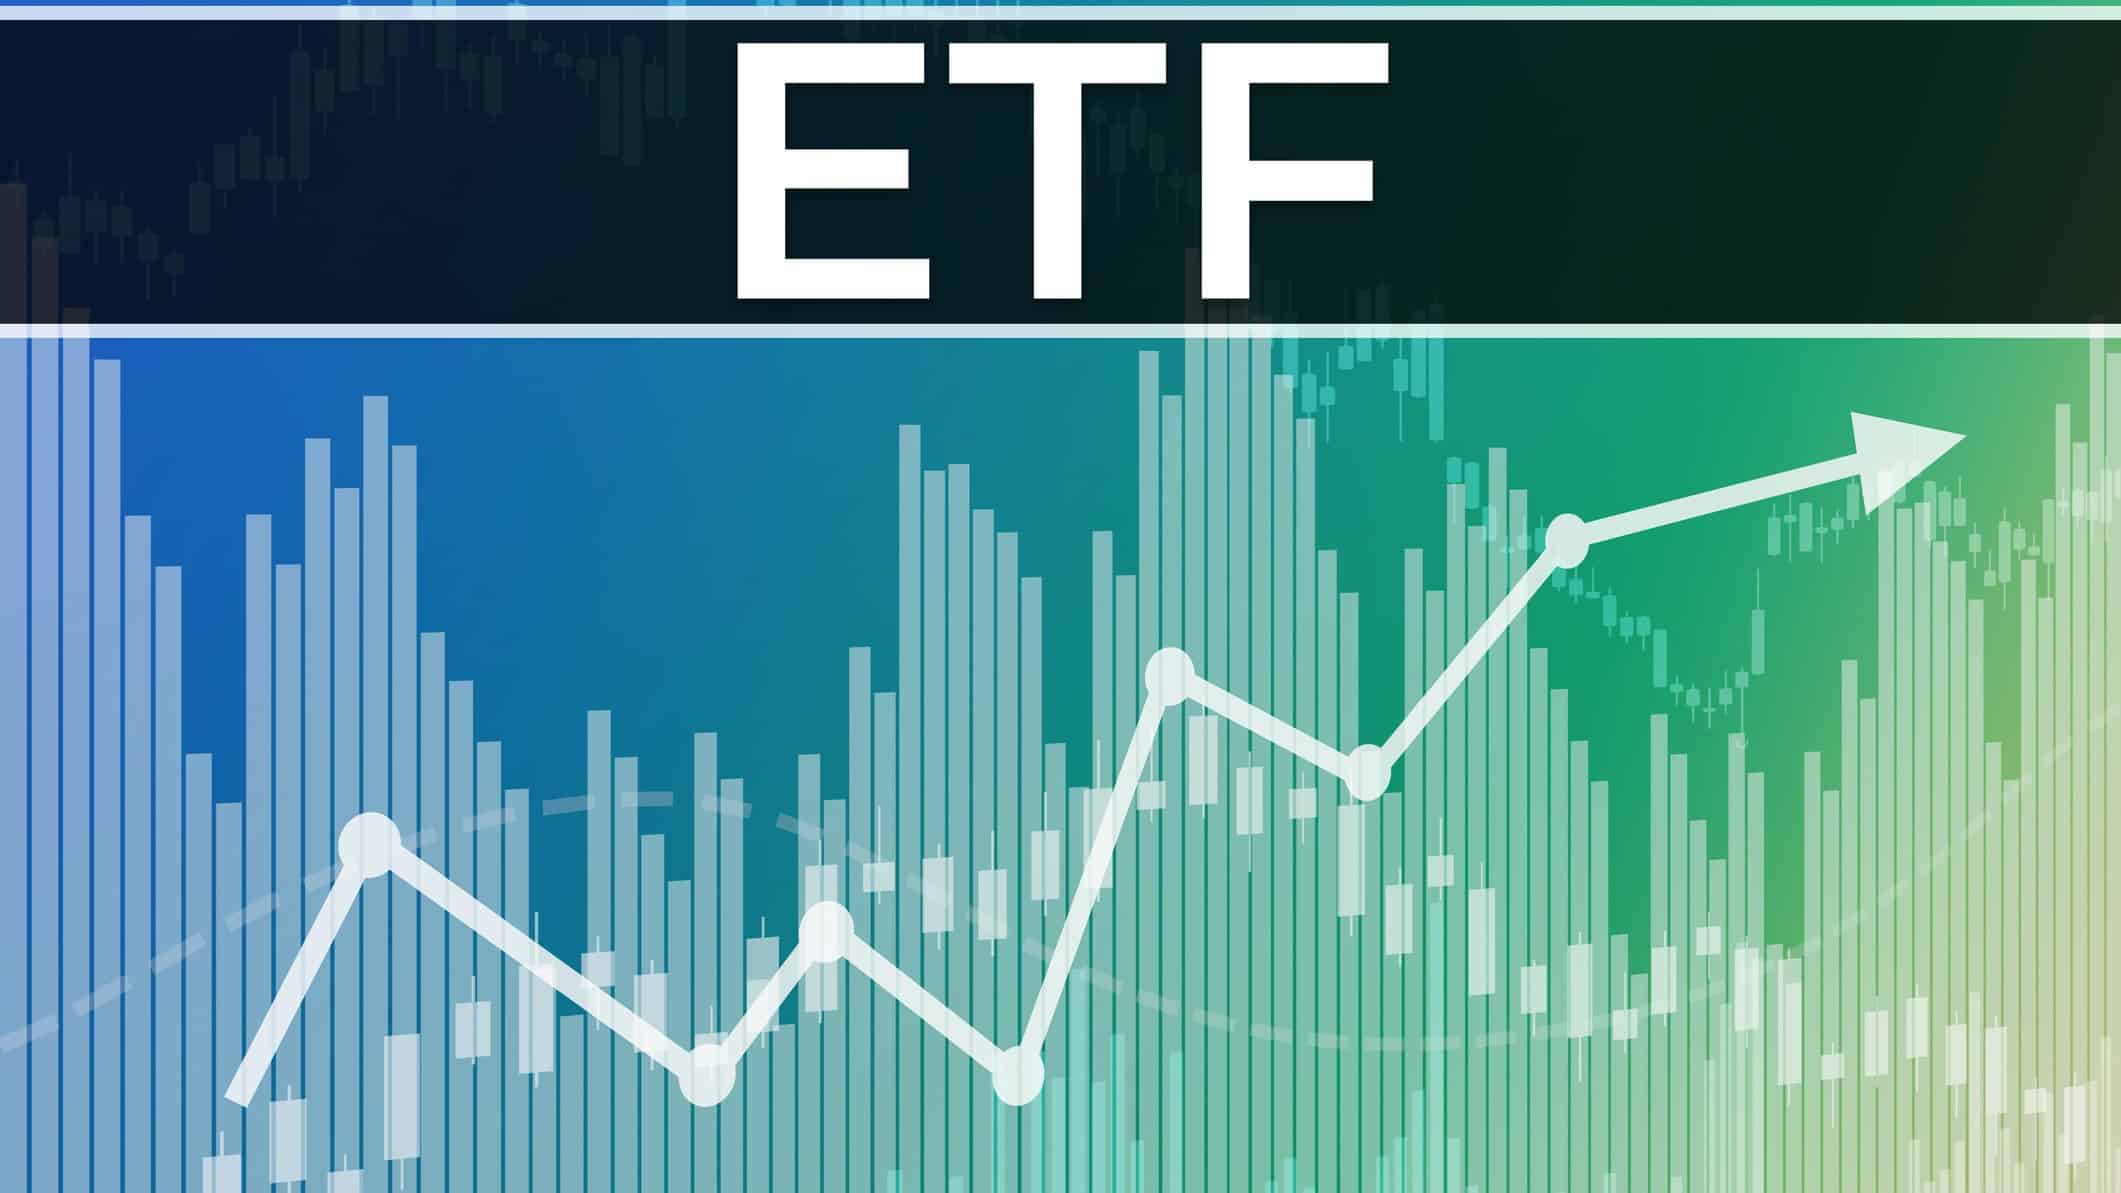 ETF written in white with an increasing stock market chart underneath.